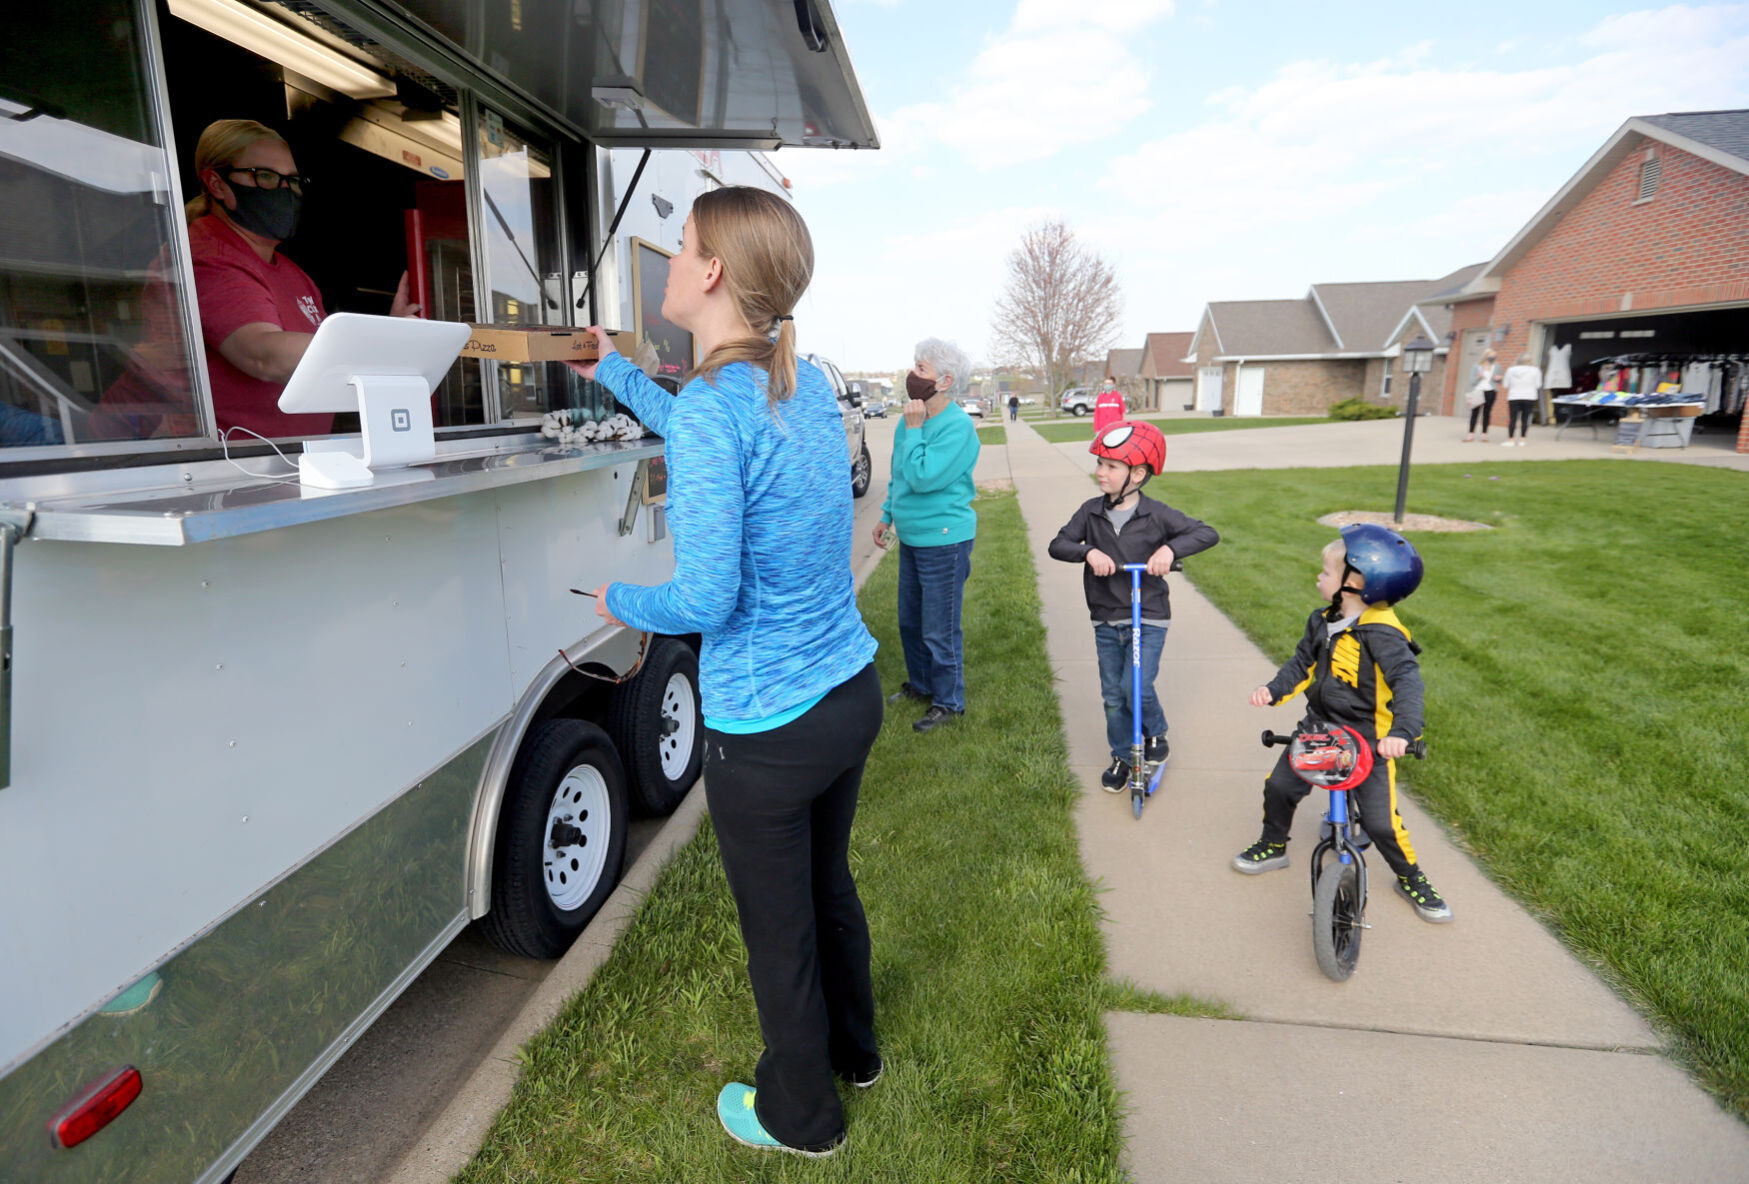 Jennifer Billmeyer gets a pizza from Irene Nelson, co-owner of Town Clock Inn, as Billmeyer’s sons Owen (left), 6, and Oliver, 3, wait outside Amanda Kennedy’s home in Asbury, Iowa, on Thursday. PHOTO CREDIT: JESSICA REILLY